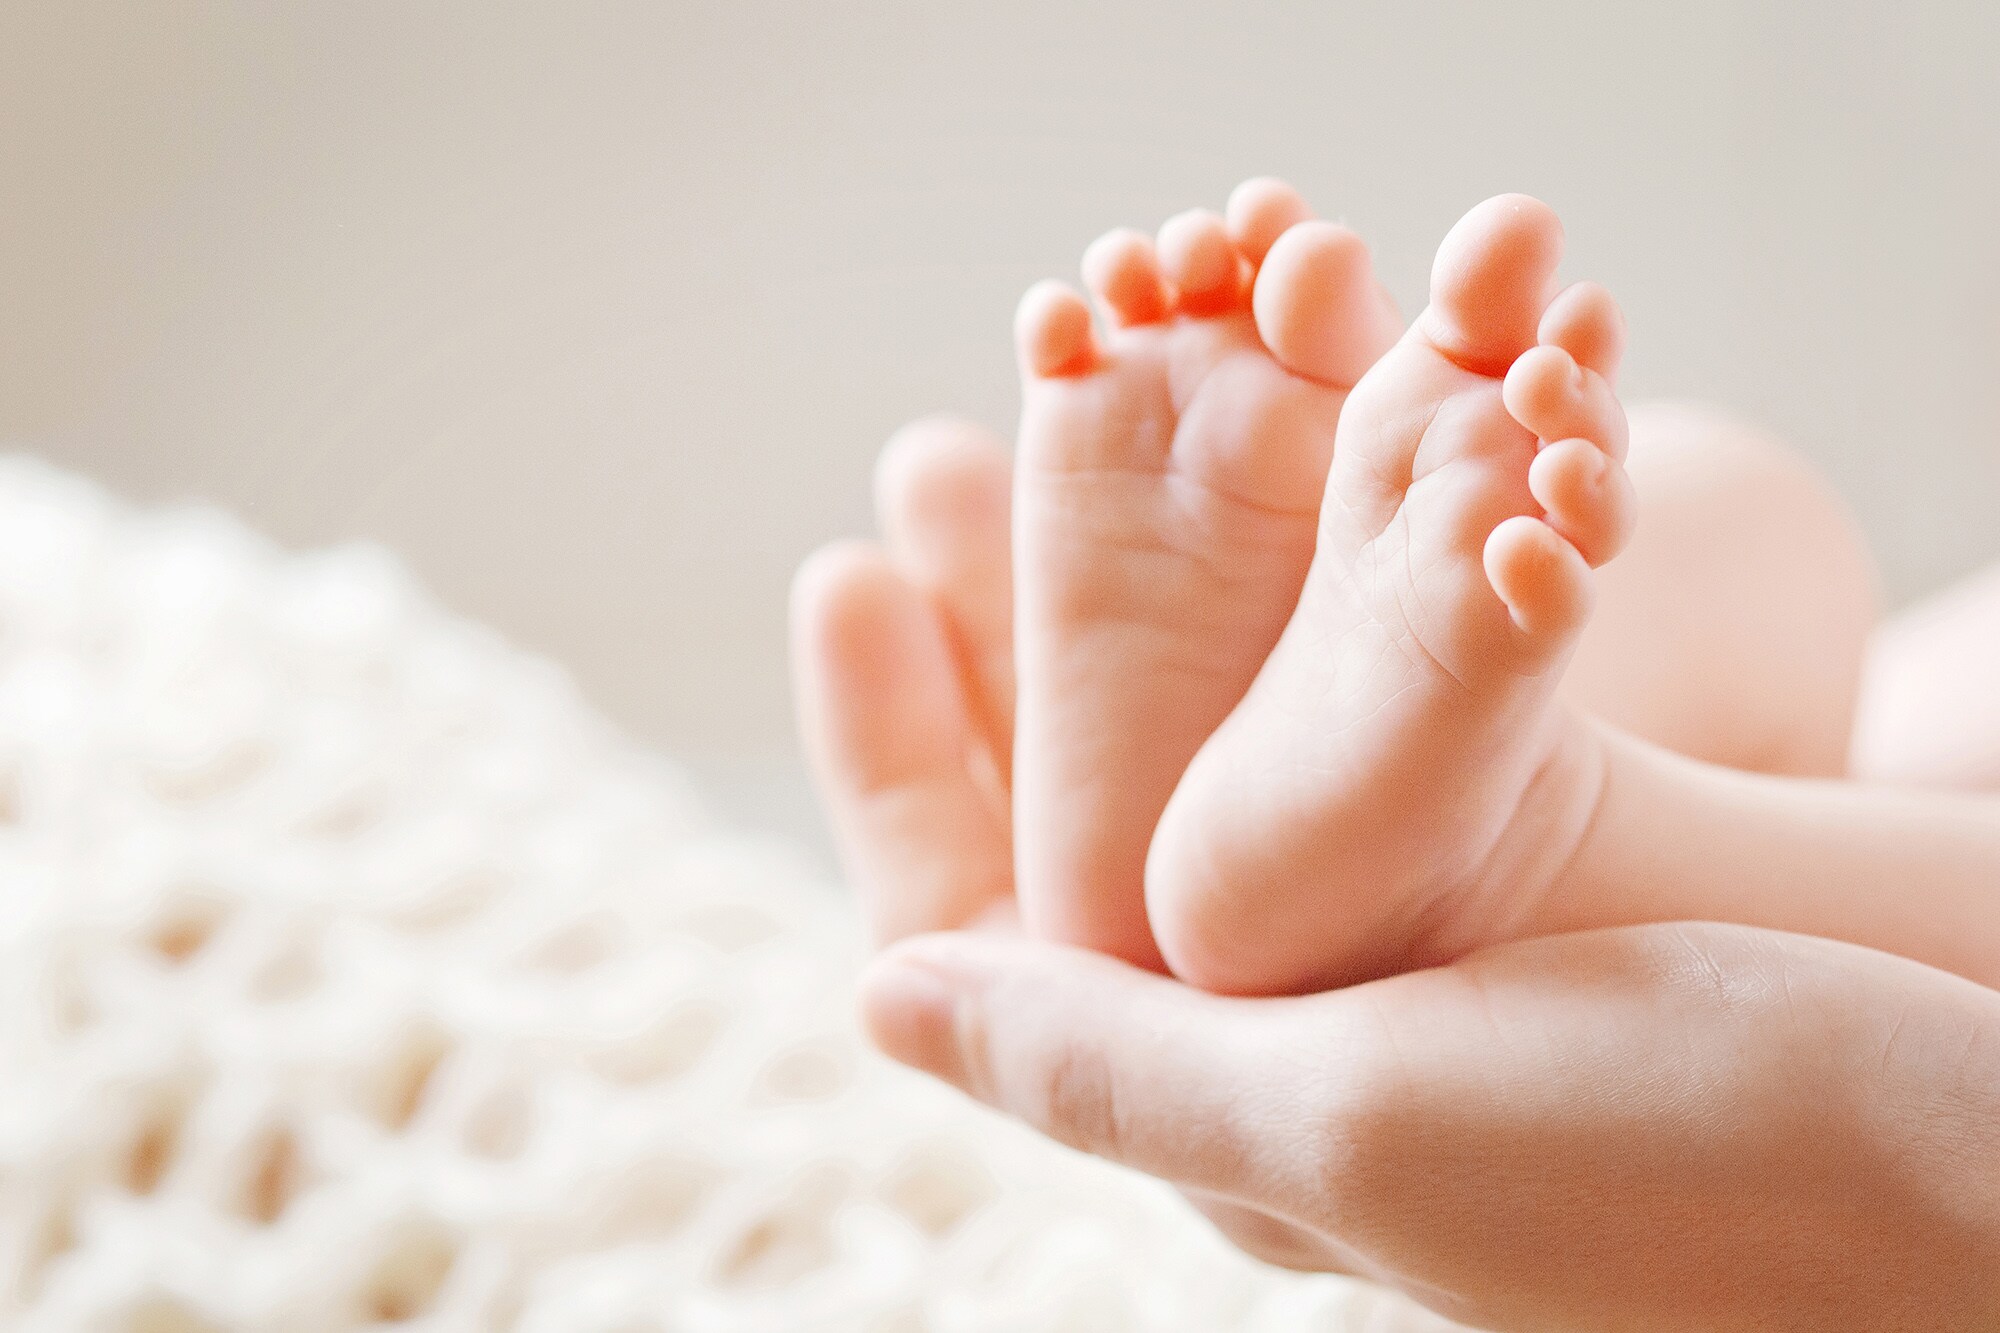 Taking Care of a Newborn's Fingers and Toes